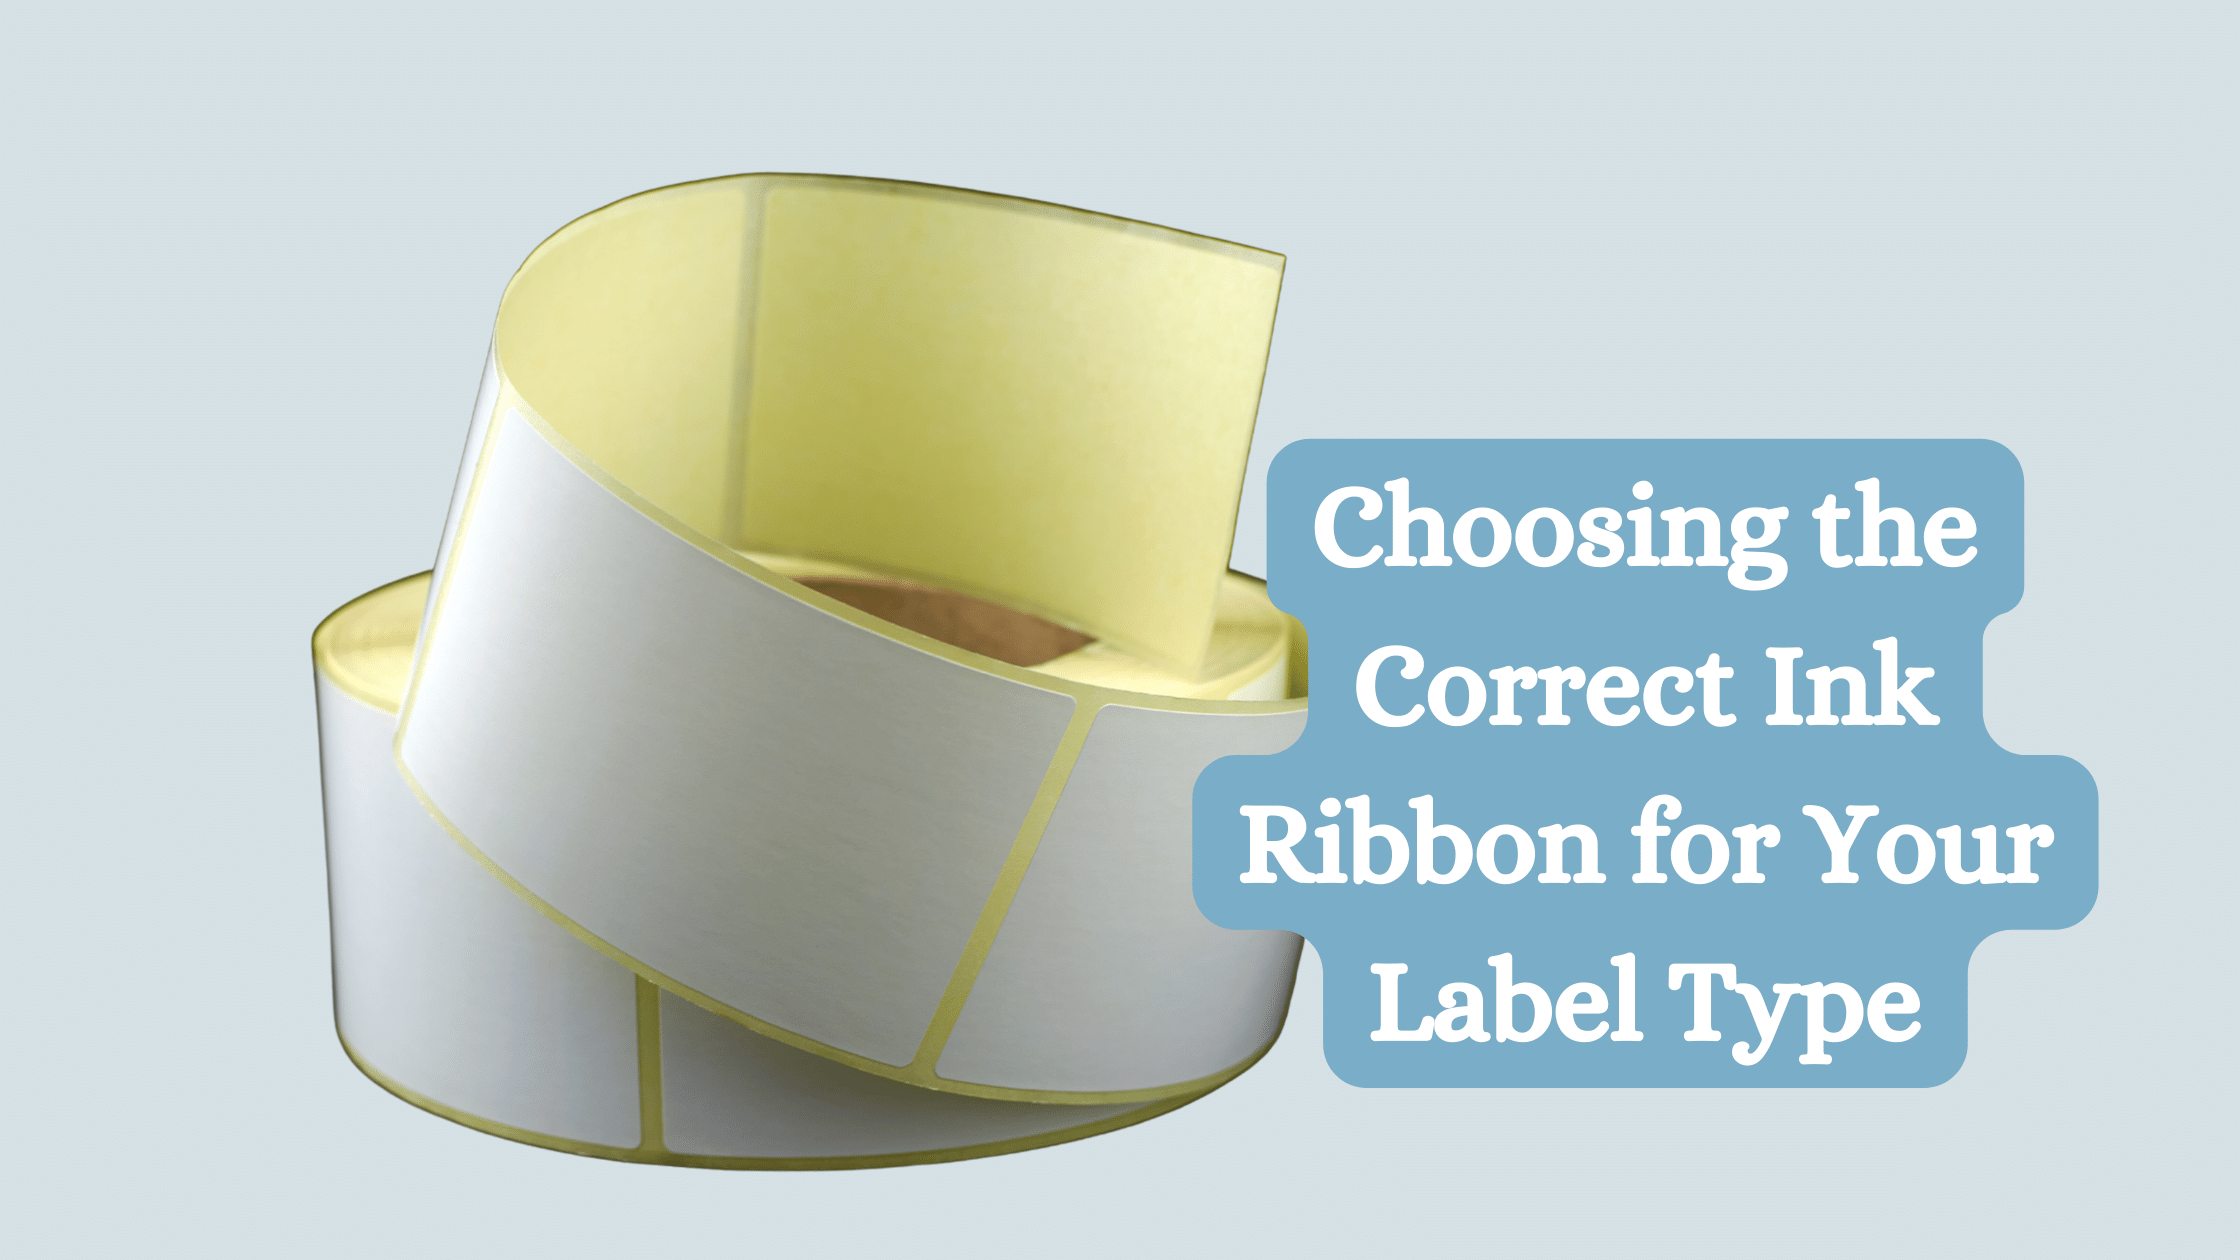 Correct Ink Ribbon for Your Label Type